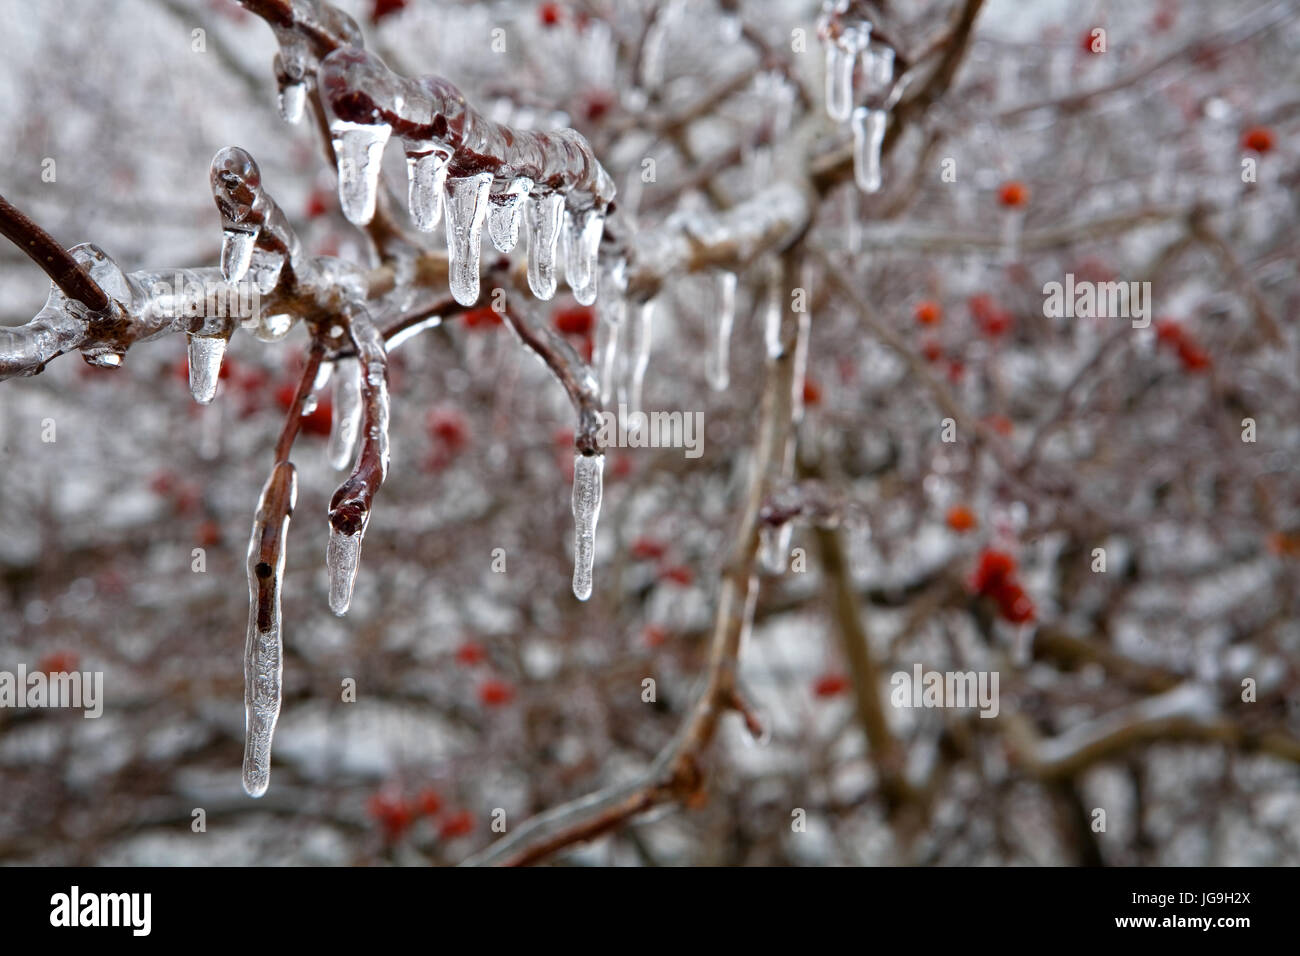 Red berries in beautiful ice drops. After the icy rain. Russia. Stock Photo